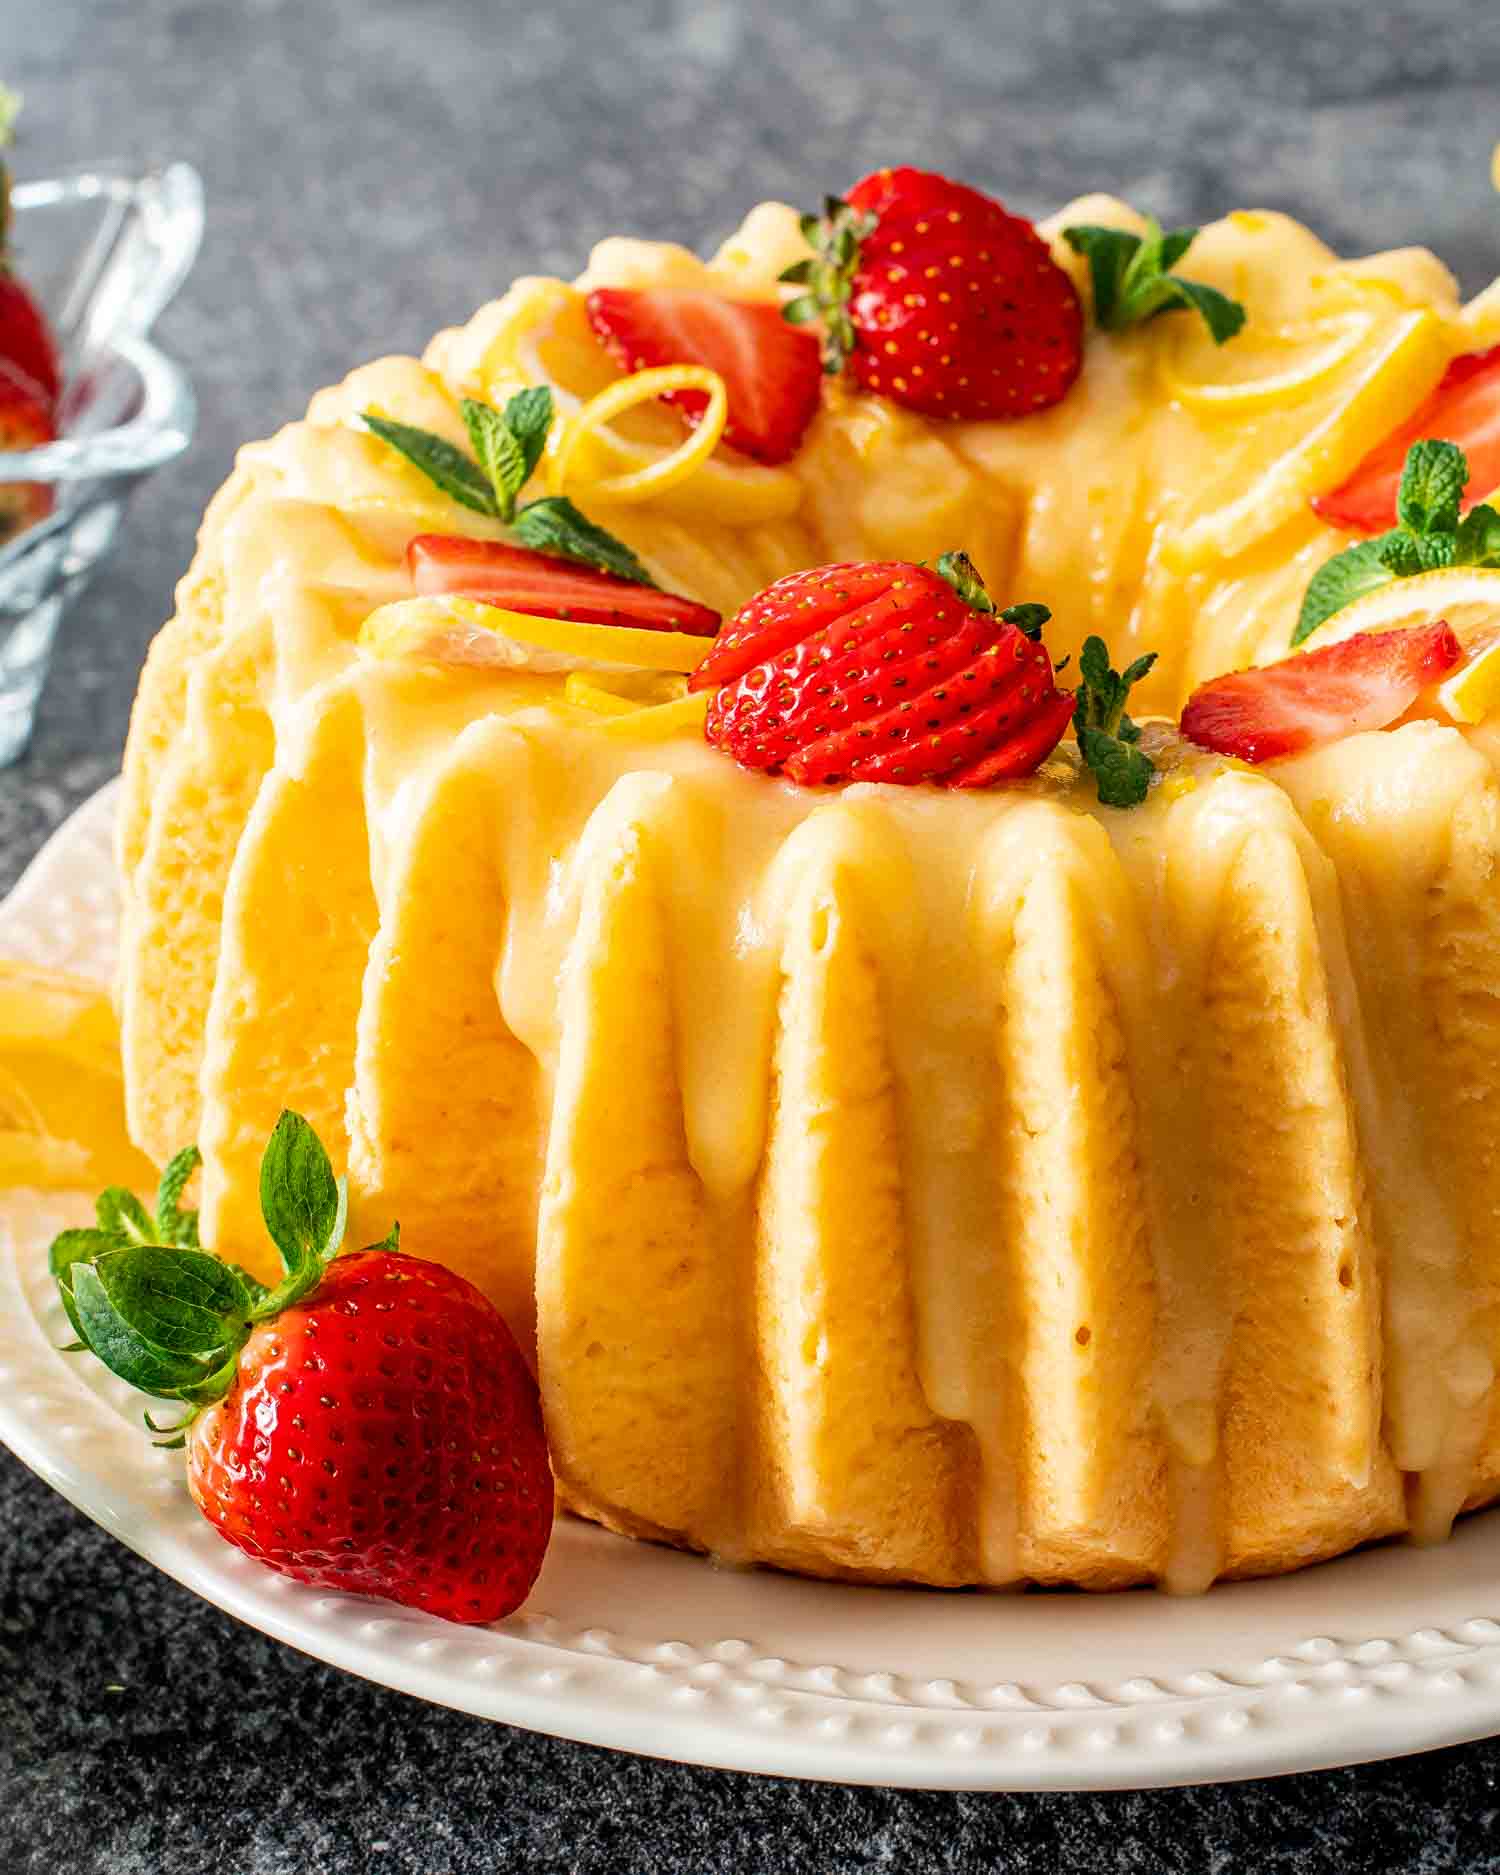 What's the Difference Between Bundt Pans, Sponge Cake Pans, and